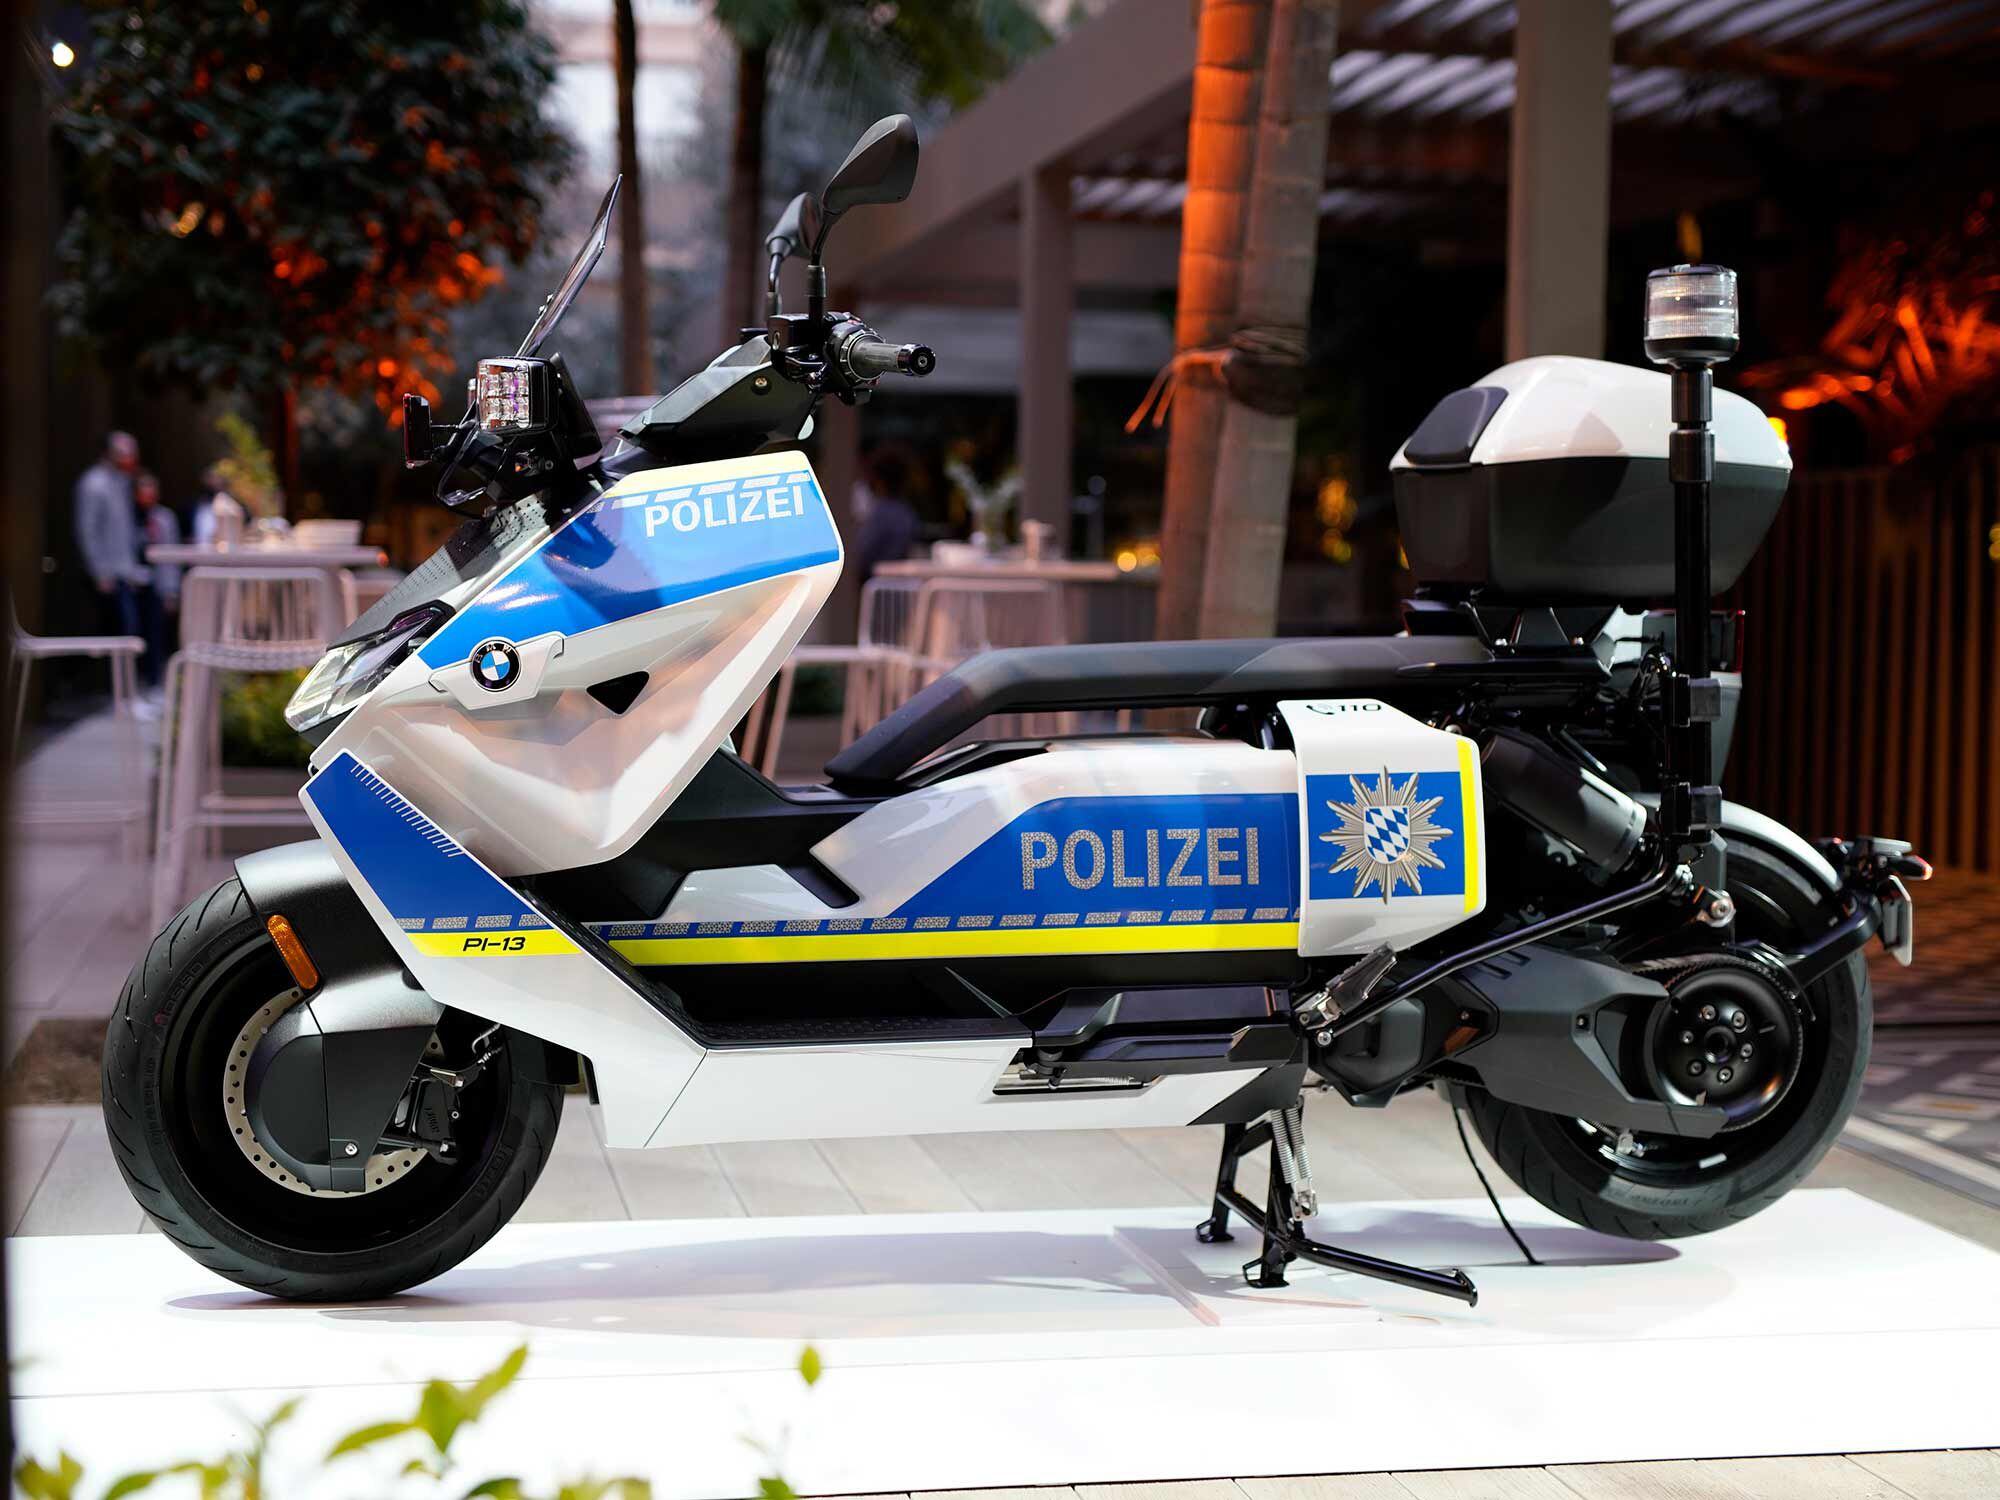 According to the brand, the CE 04 can be easily outfitted to meet the needs of local emergency services.